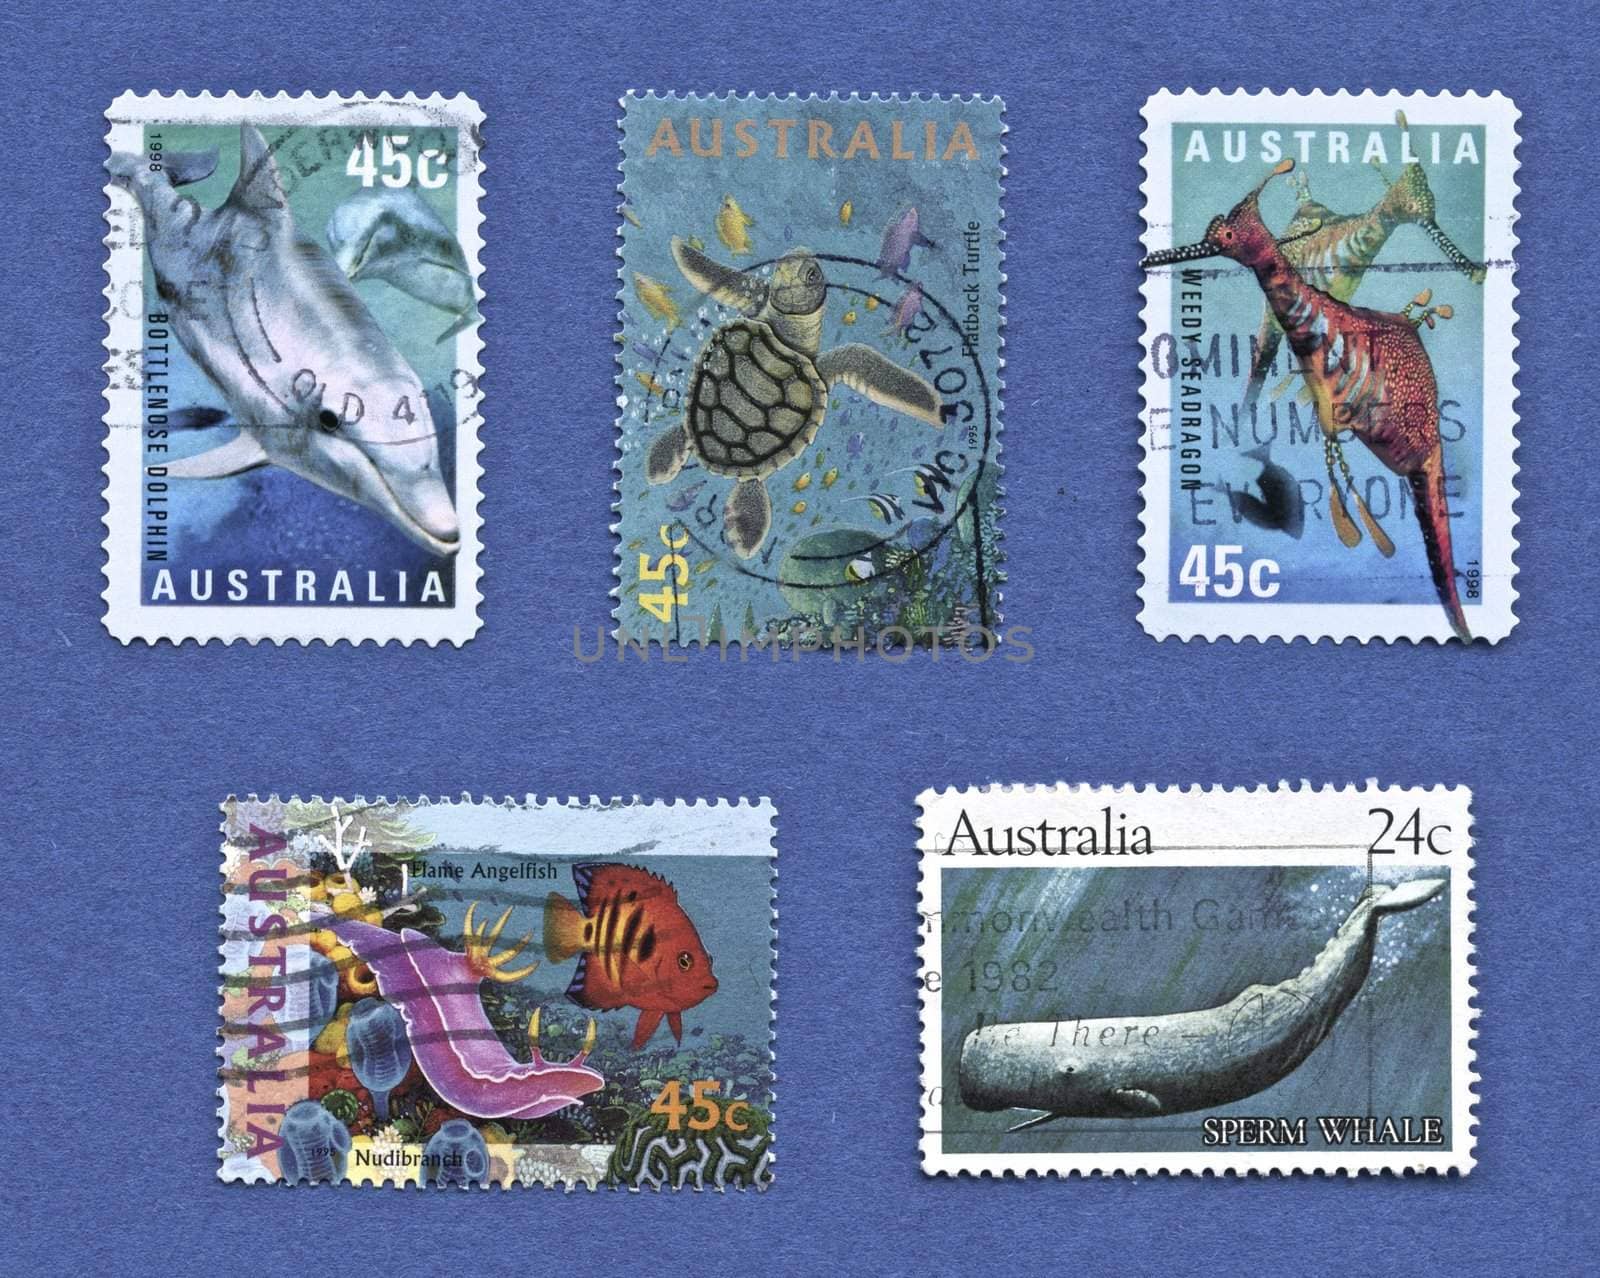 AUSTRALIA - CIRCA 1991: stamp printed by Australis , shows dolphins, turtle, seadragon, wales and fish stamps printed in 1982 to 1998